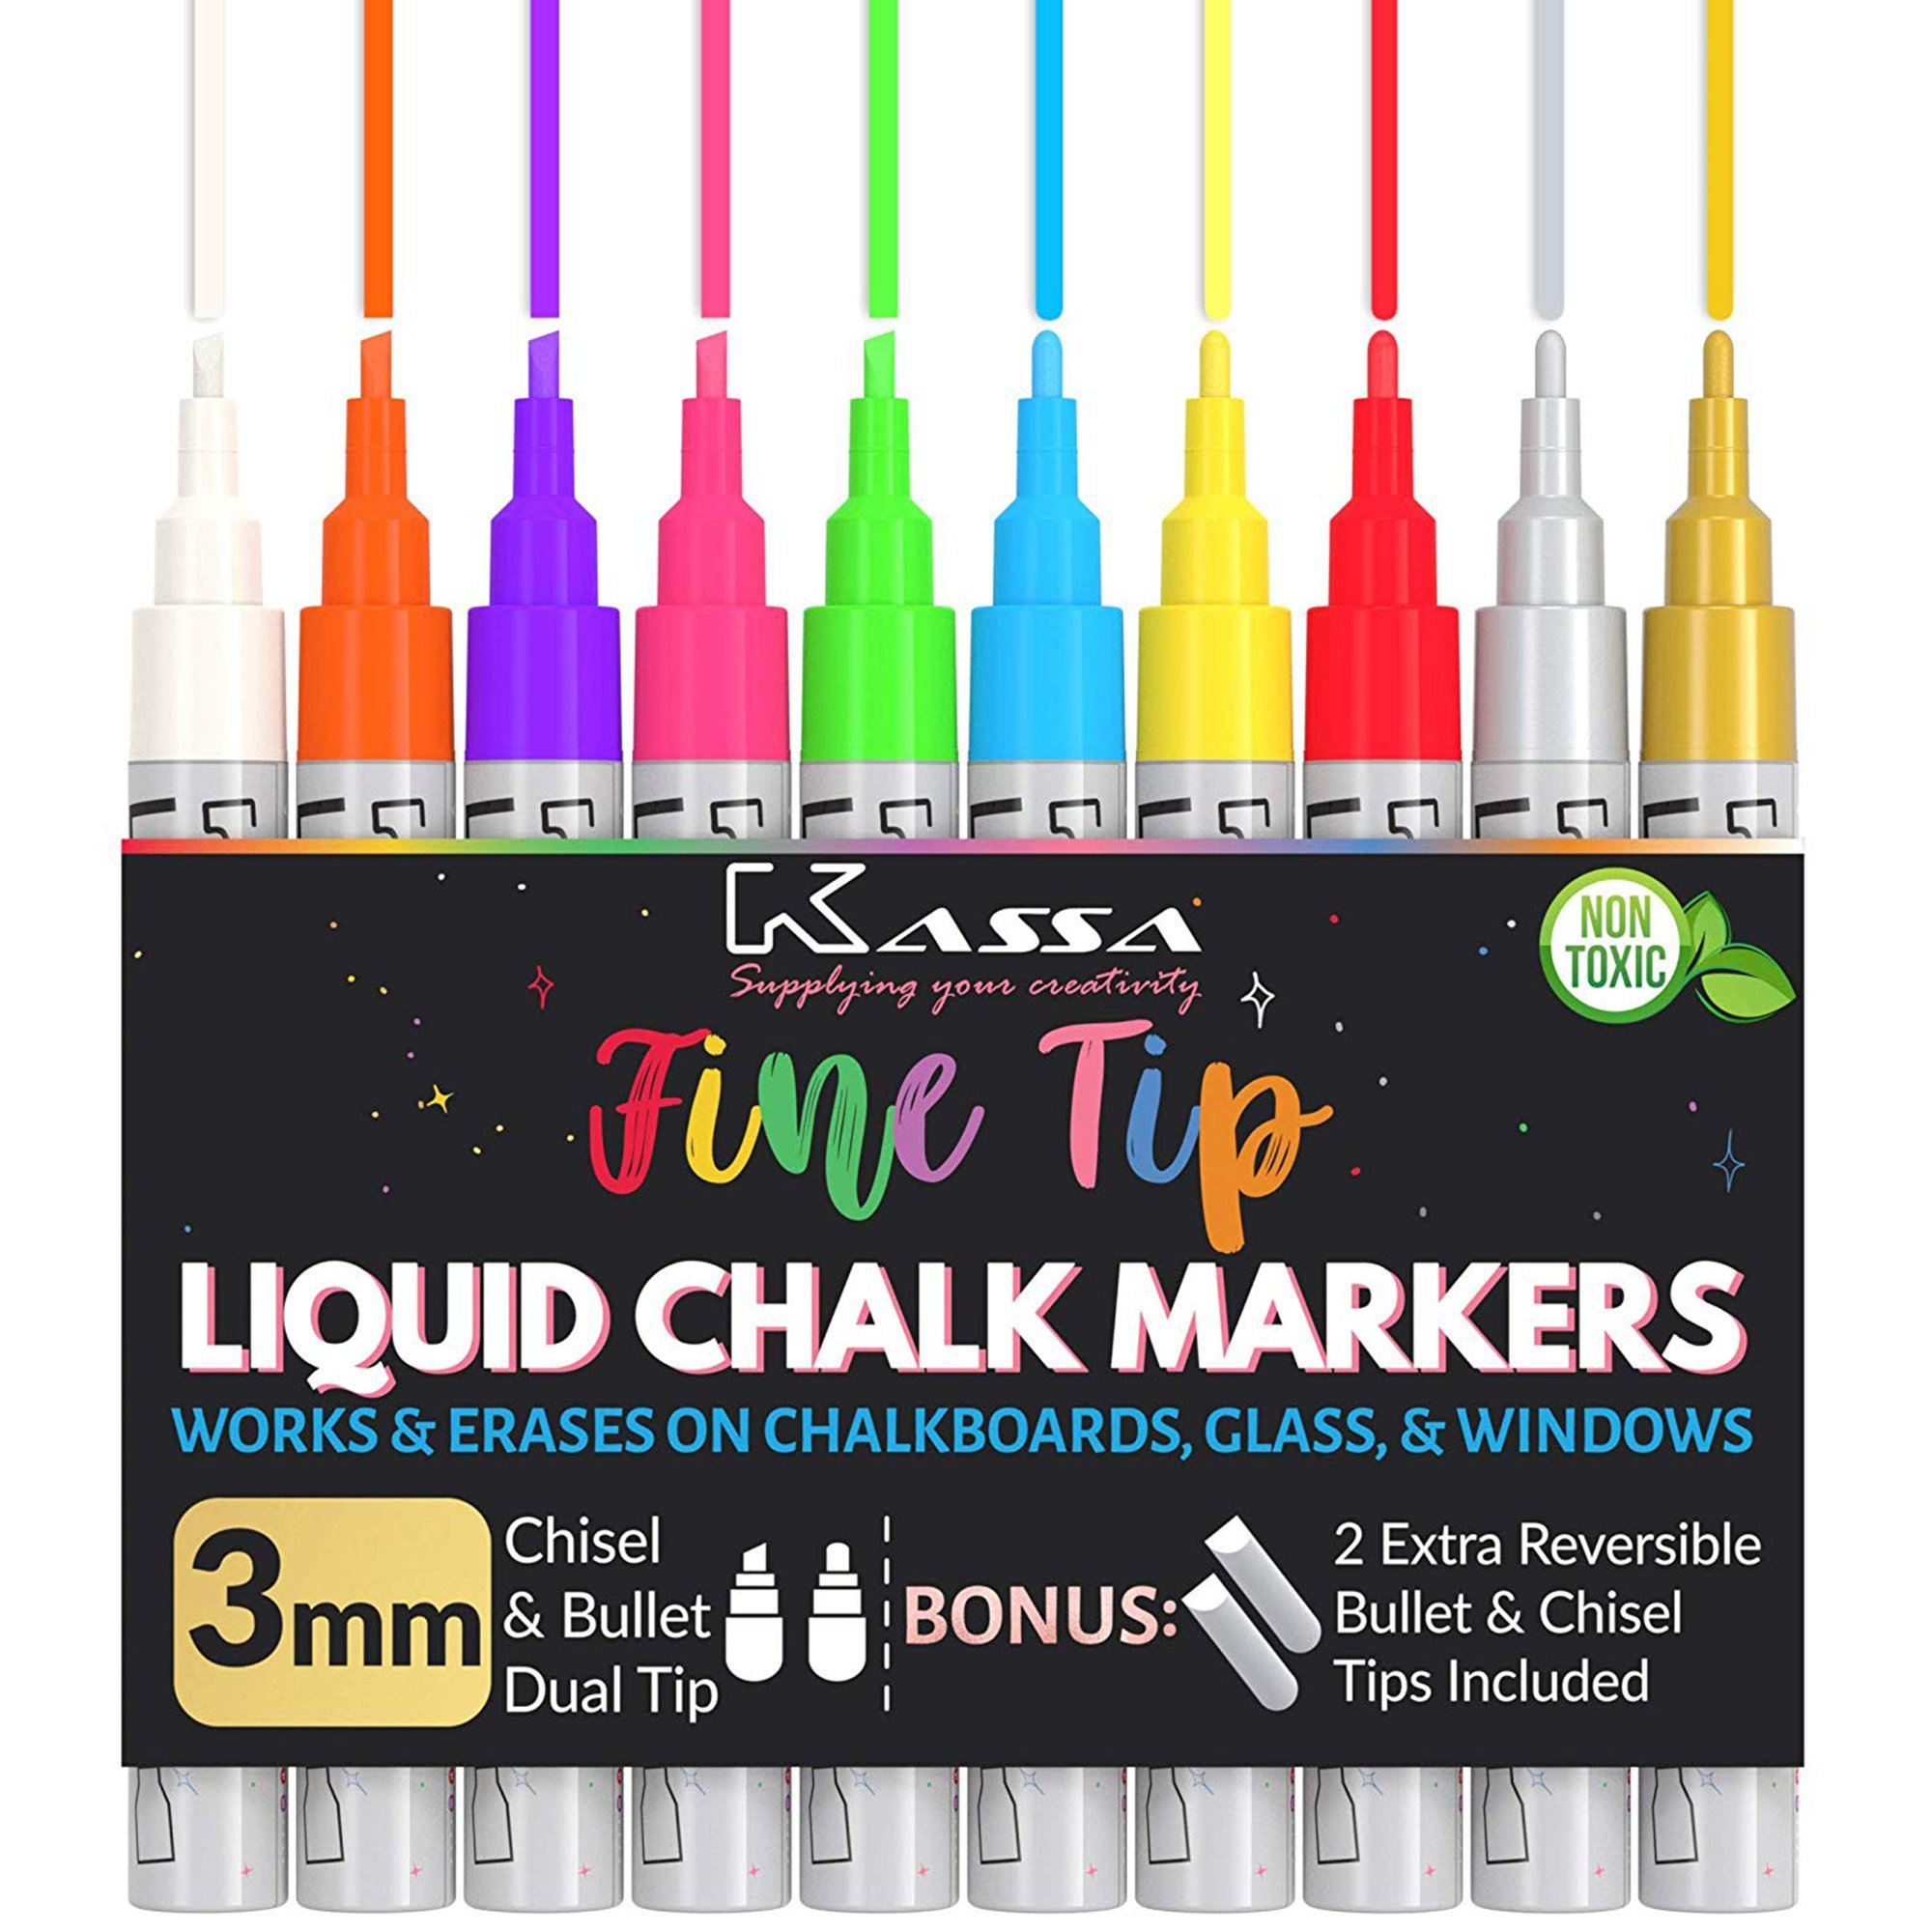 Neon Chalk Markers with 1mm Extra Fine Nib - Pack of 10 - Chalkola Art  Supply